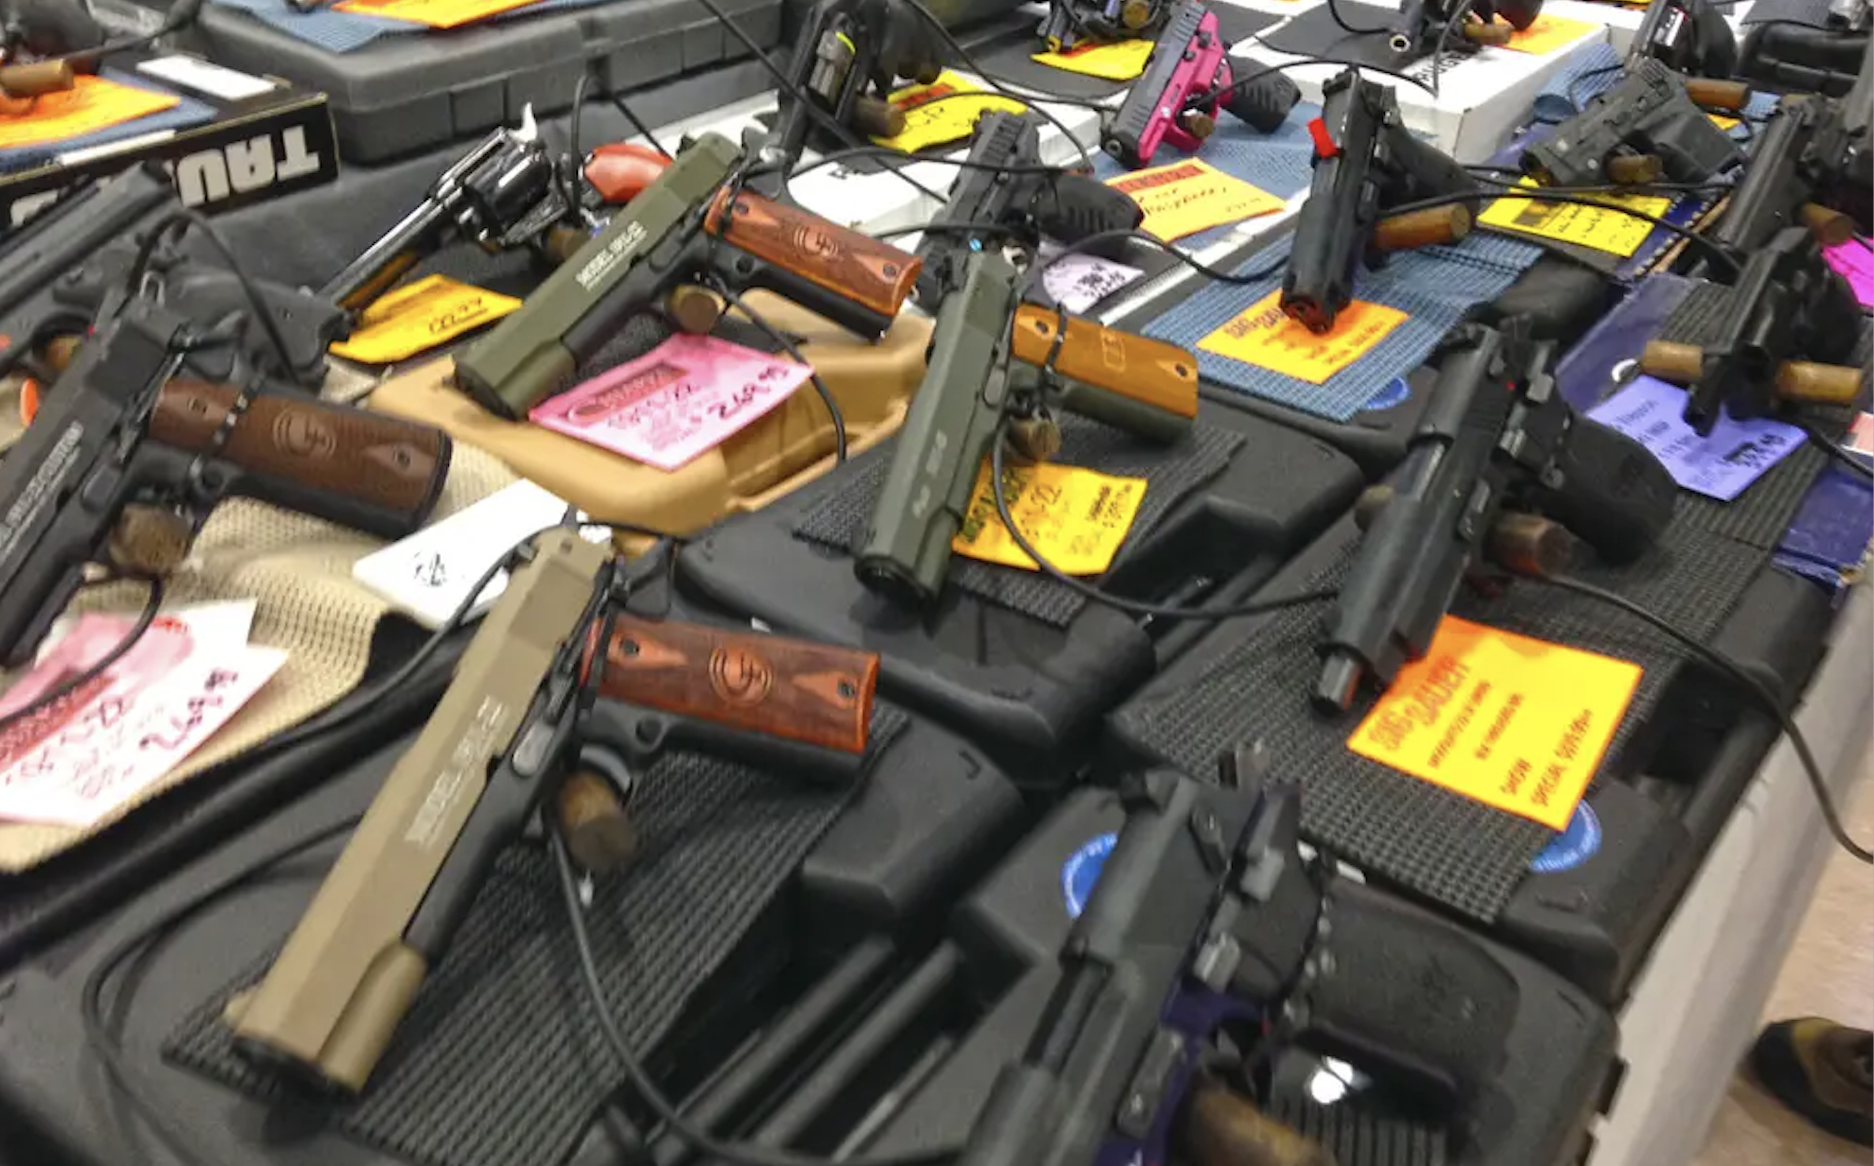 Three-day waiting period for gun purchases starts on Sunday...